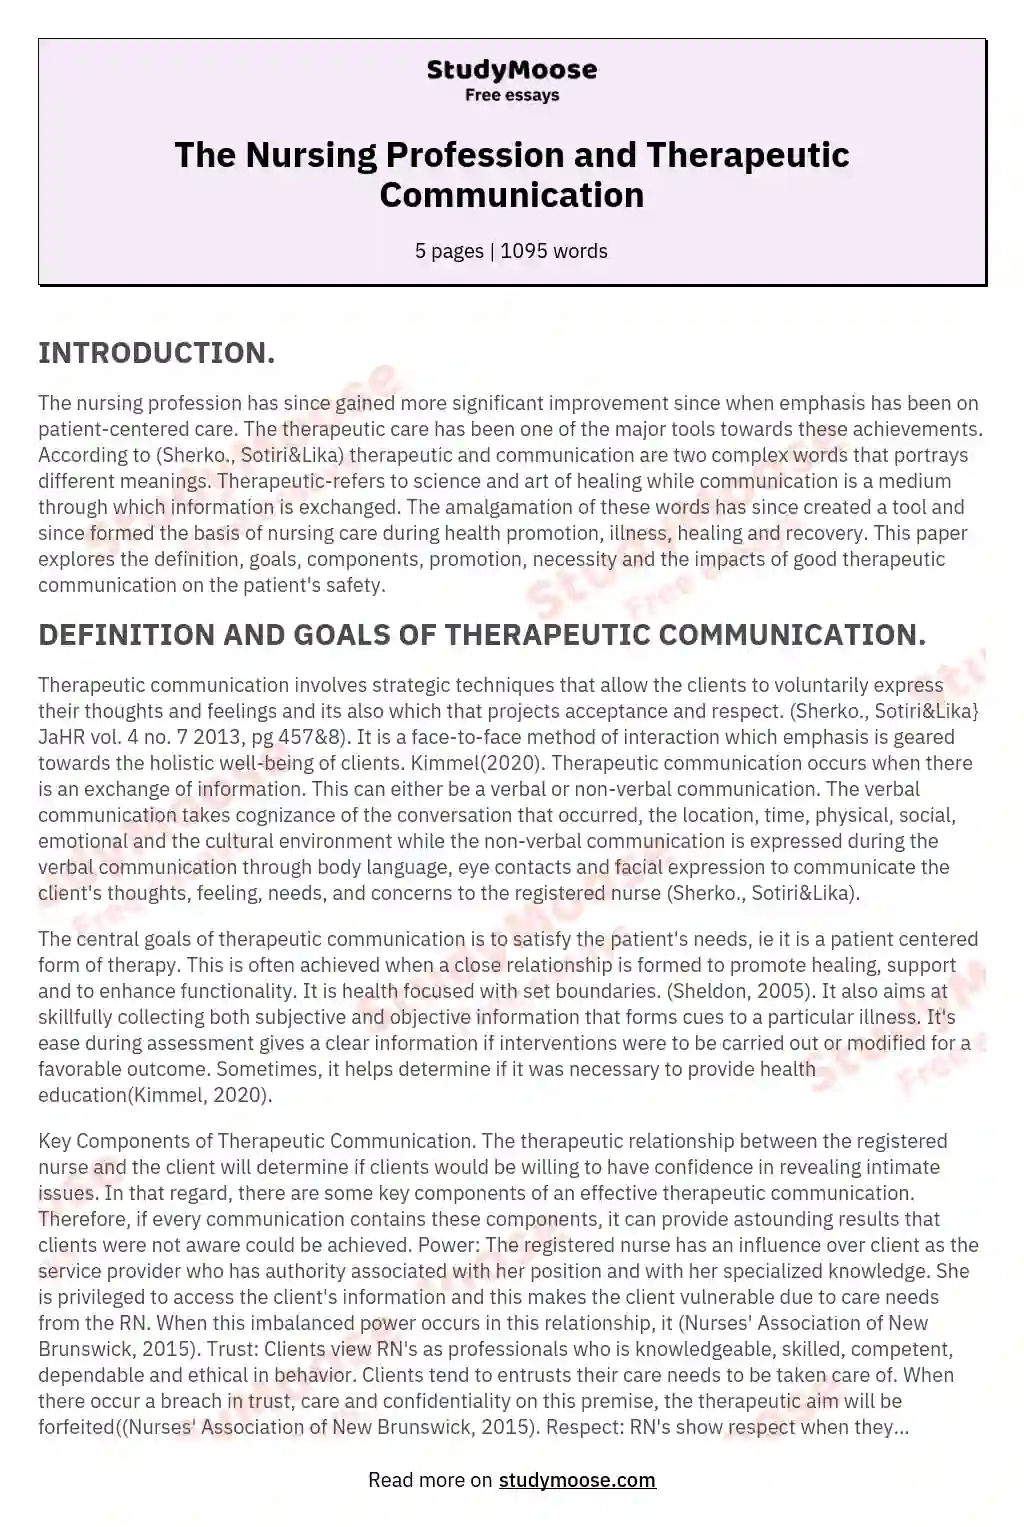 The Nursing Profession and Therapeutic Communication essay